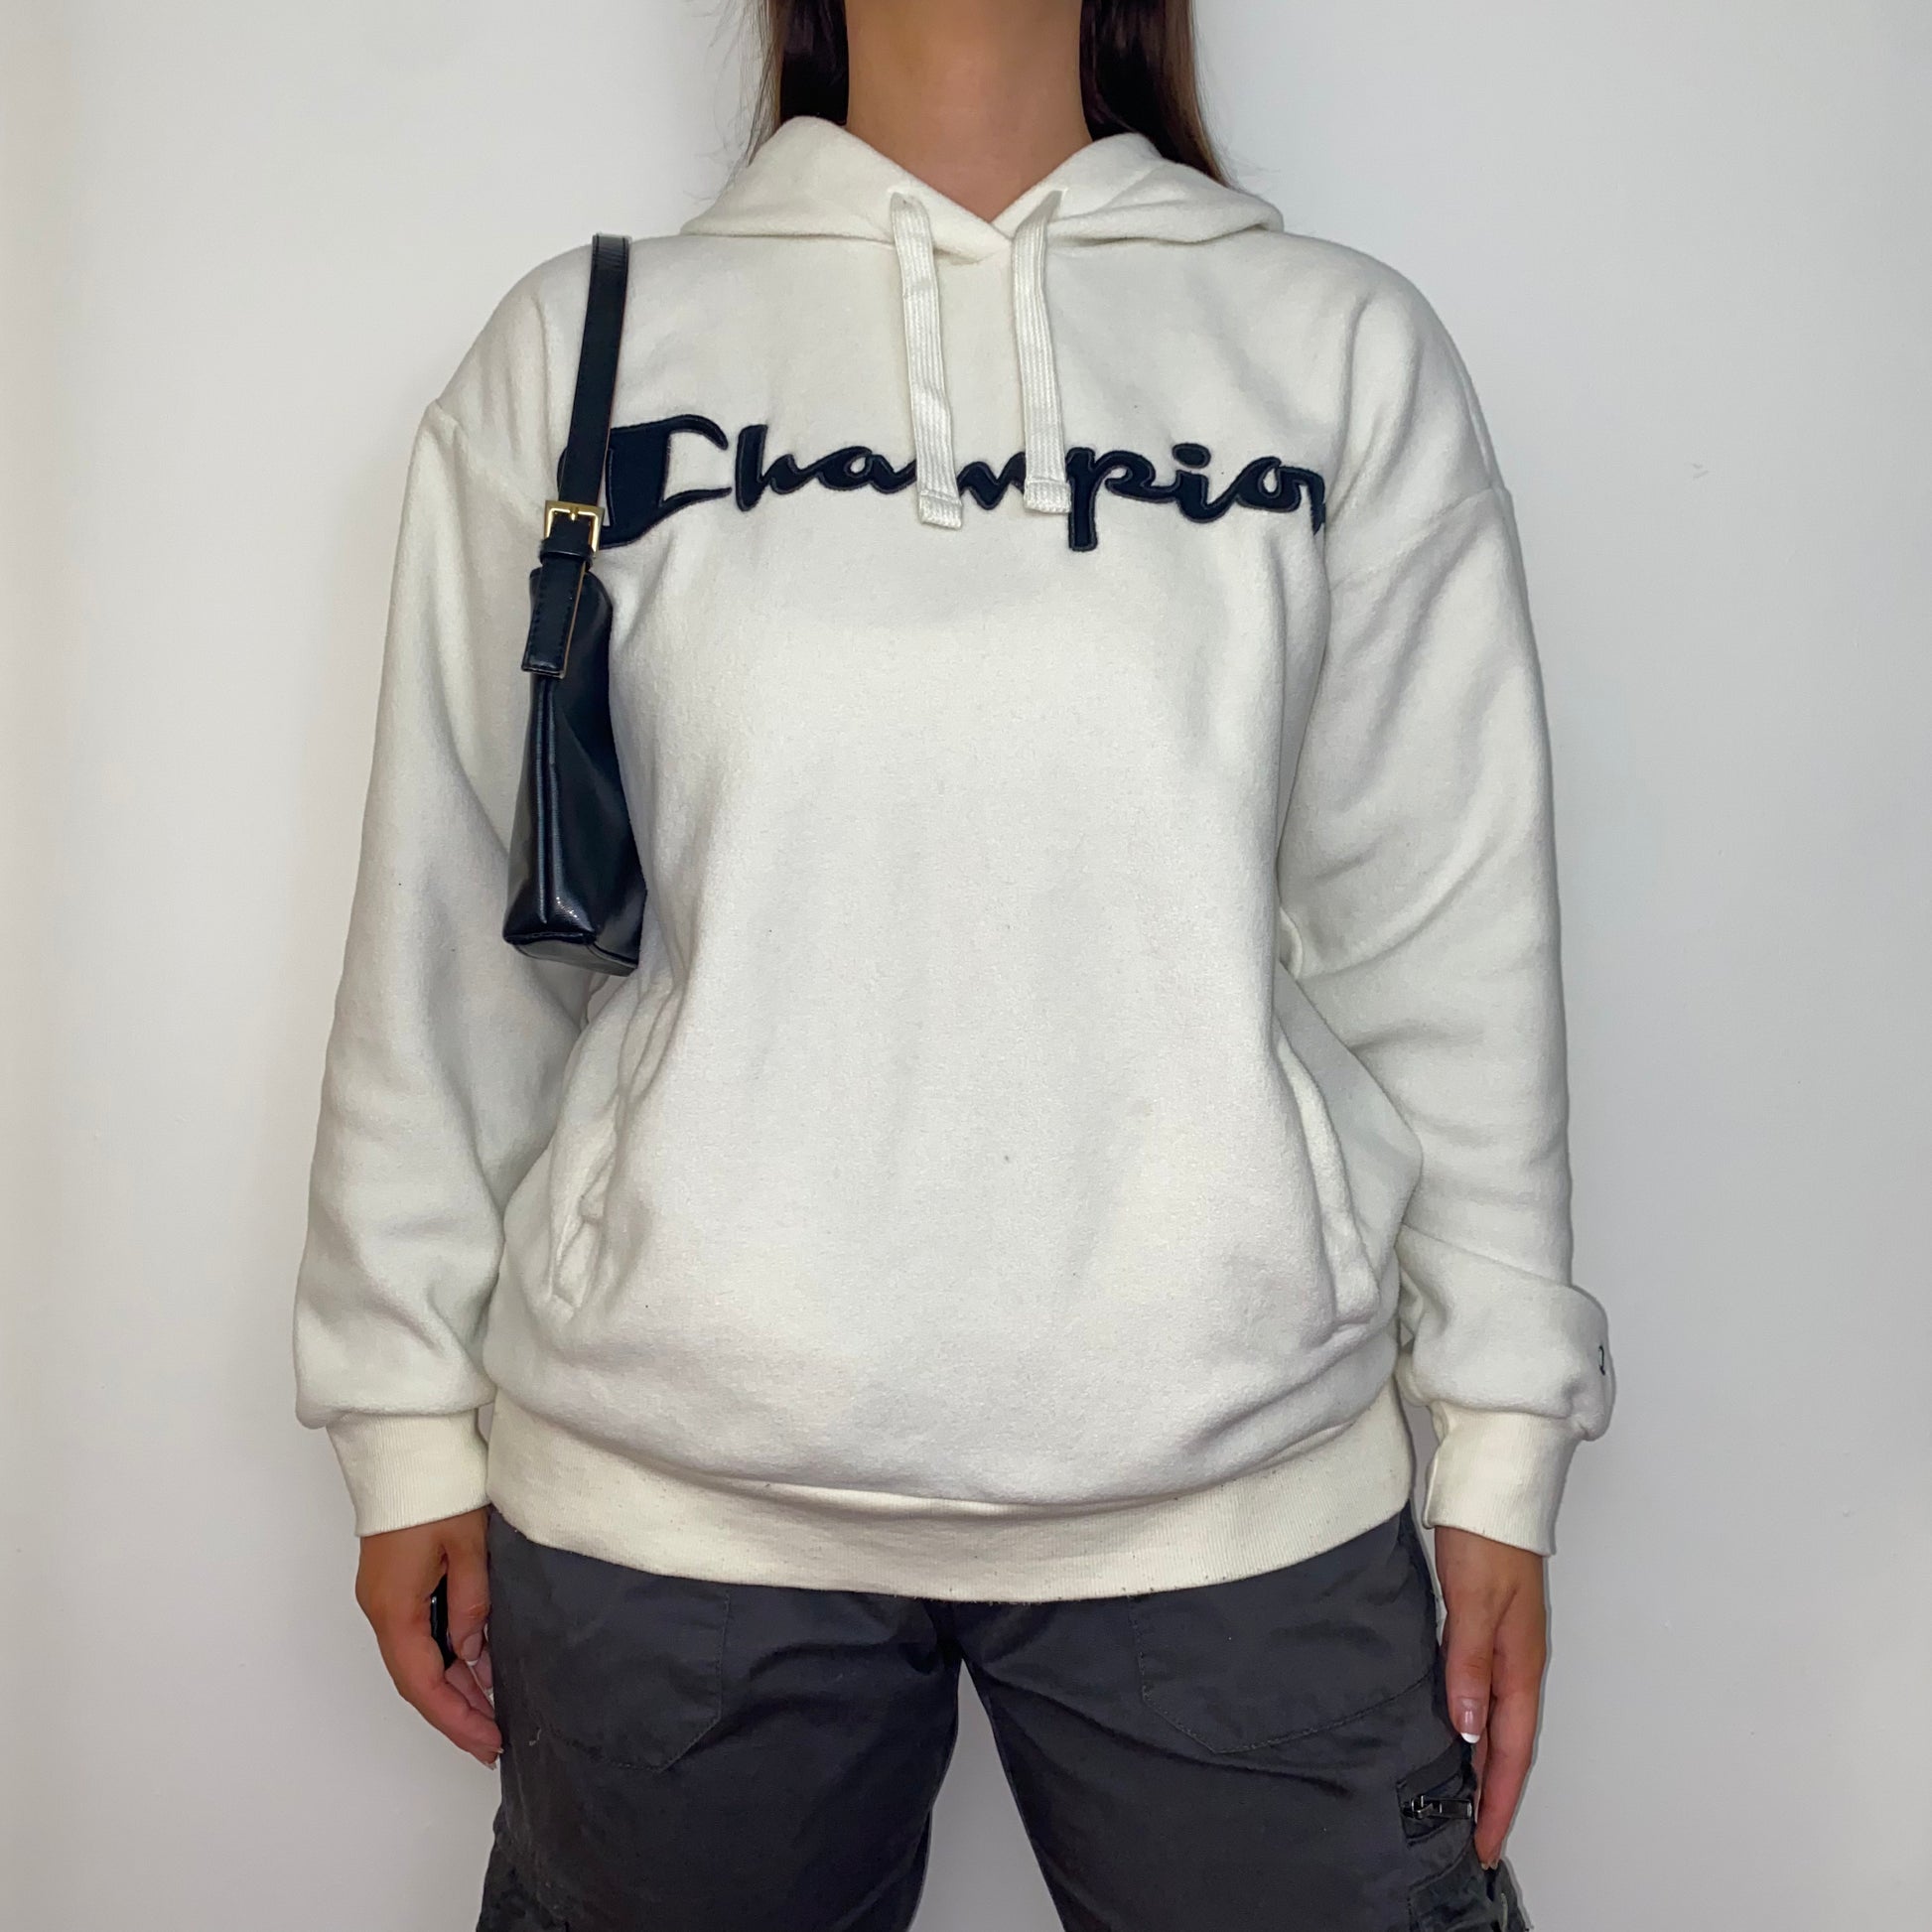 white hoodie with black big text champion logo shown on a model wearing grey cargo trousers and a black shoulder bag